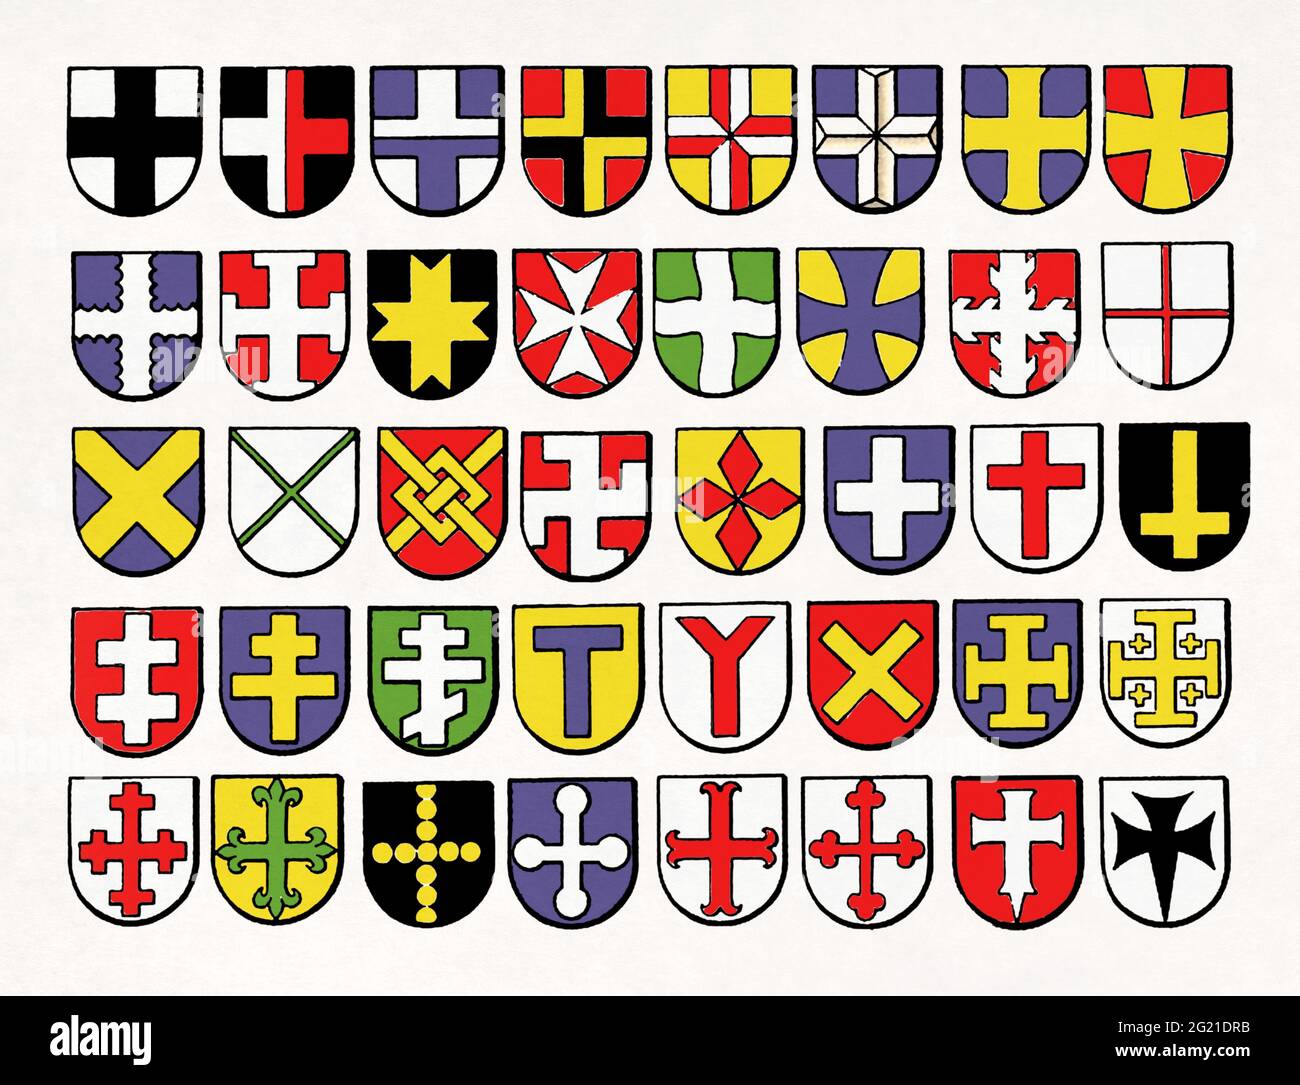 Collection of heraldic cross variants from medieval Europe. Stock Photo